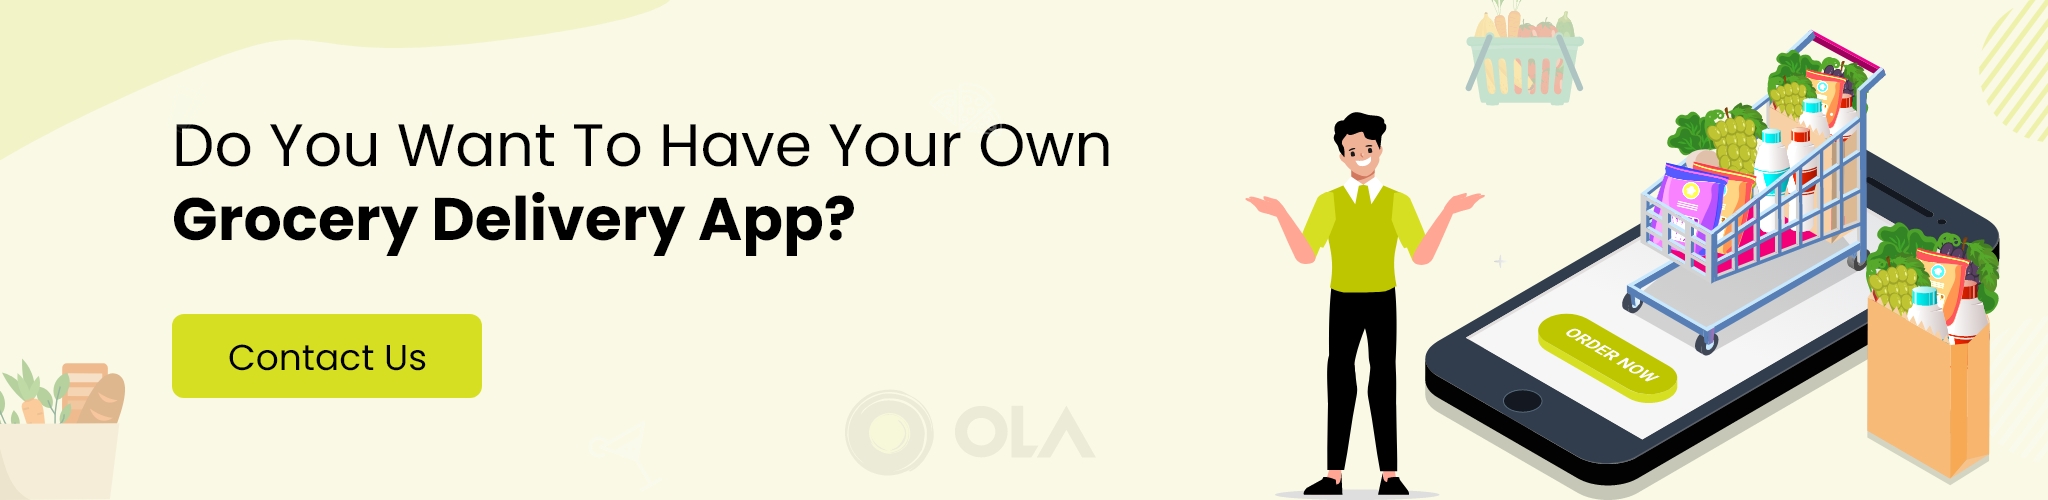 Ola grocery delivery